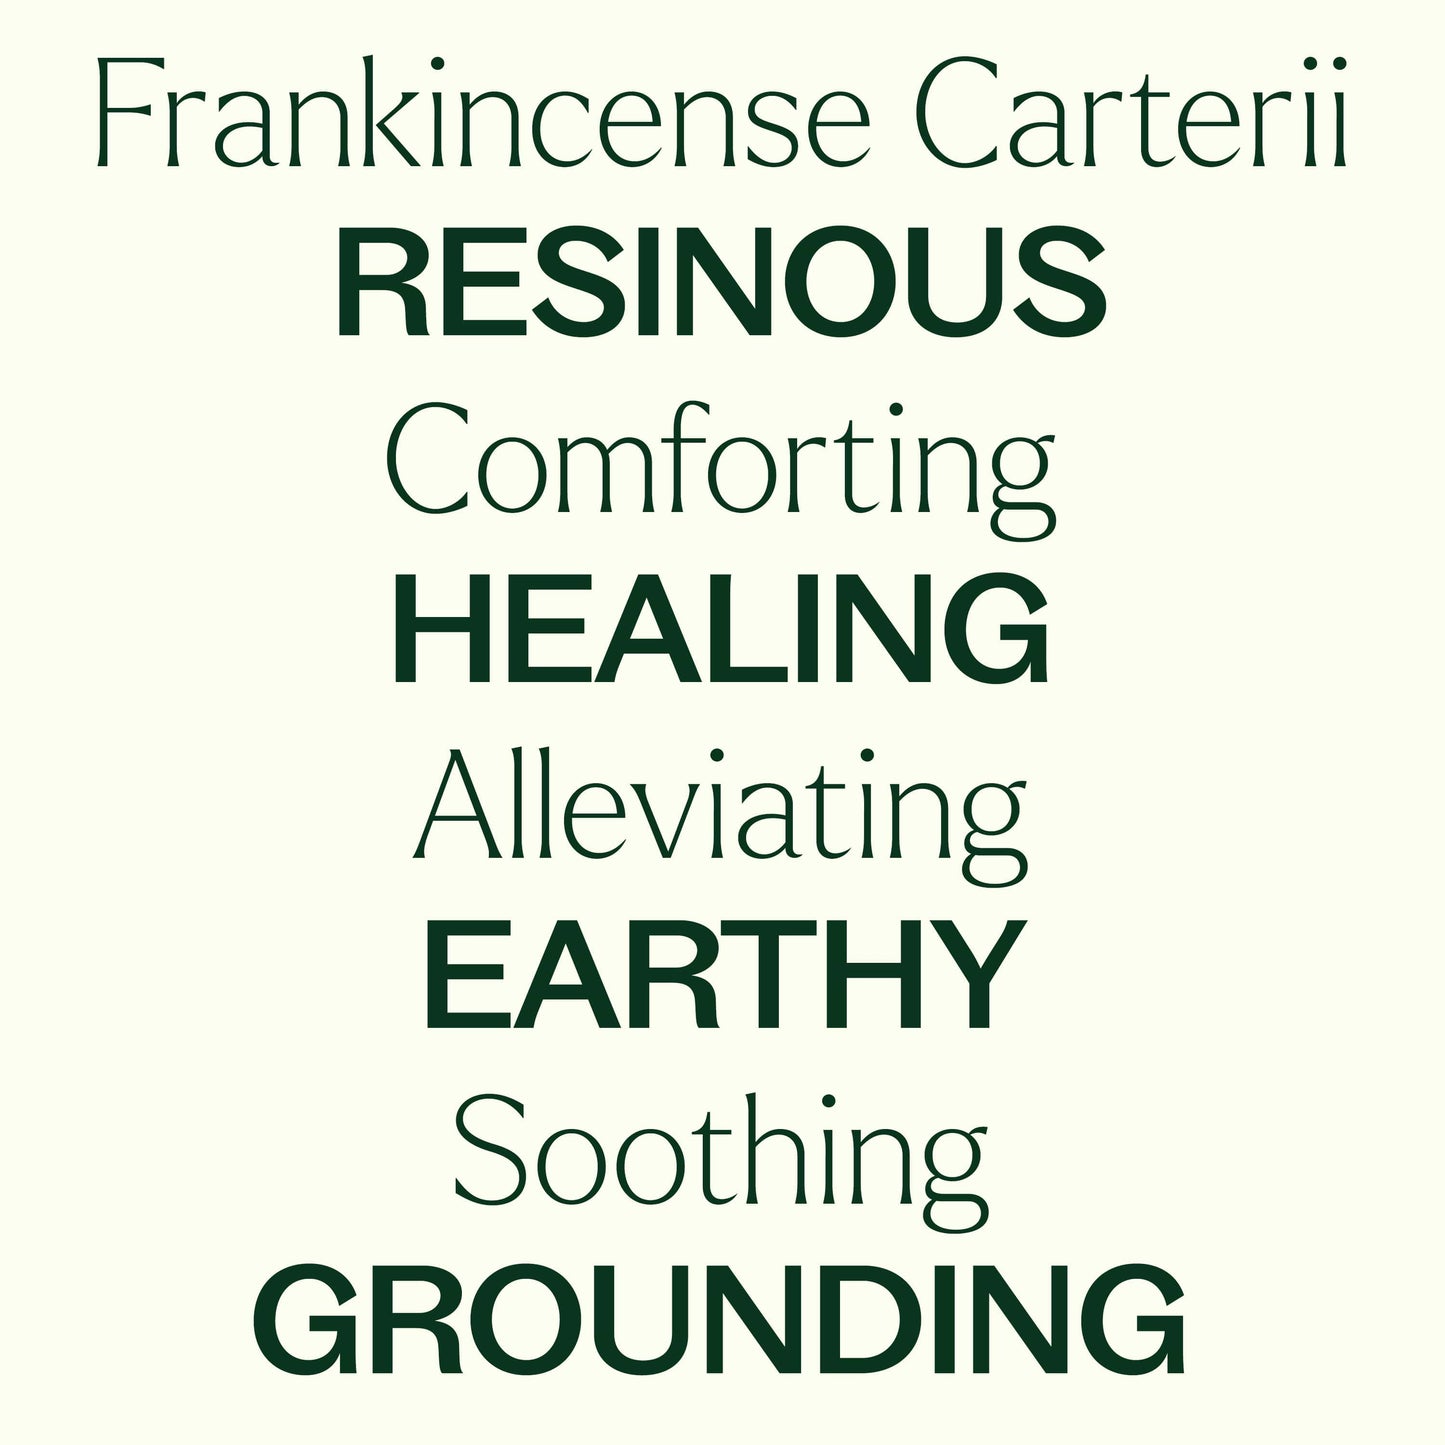 Organic Frankincense Carterii Essential Oil is comforting, healing, alleviating, earthy, soothing, grounding